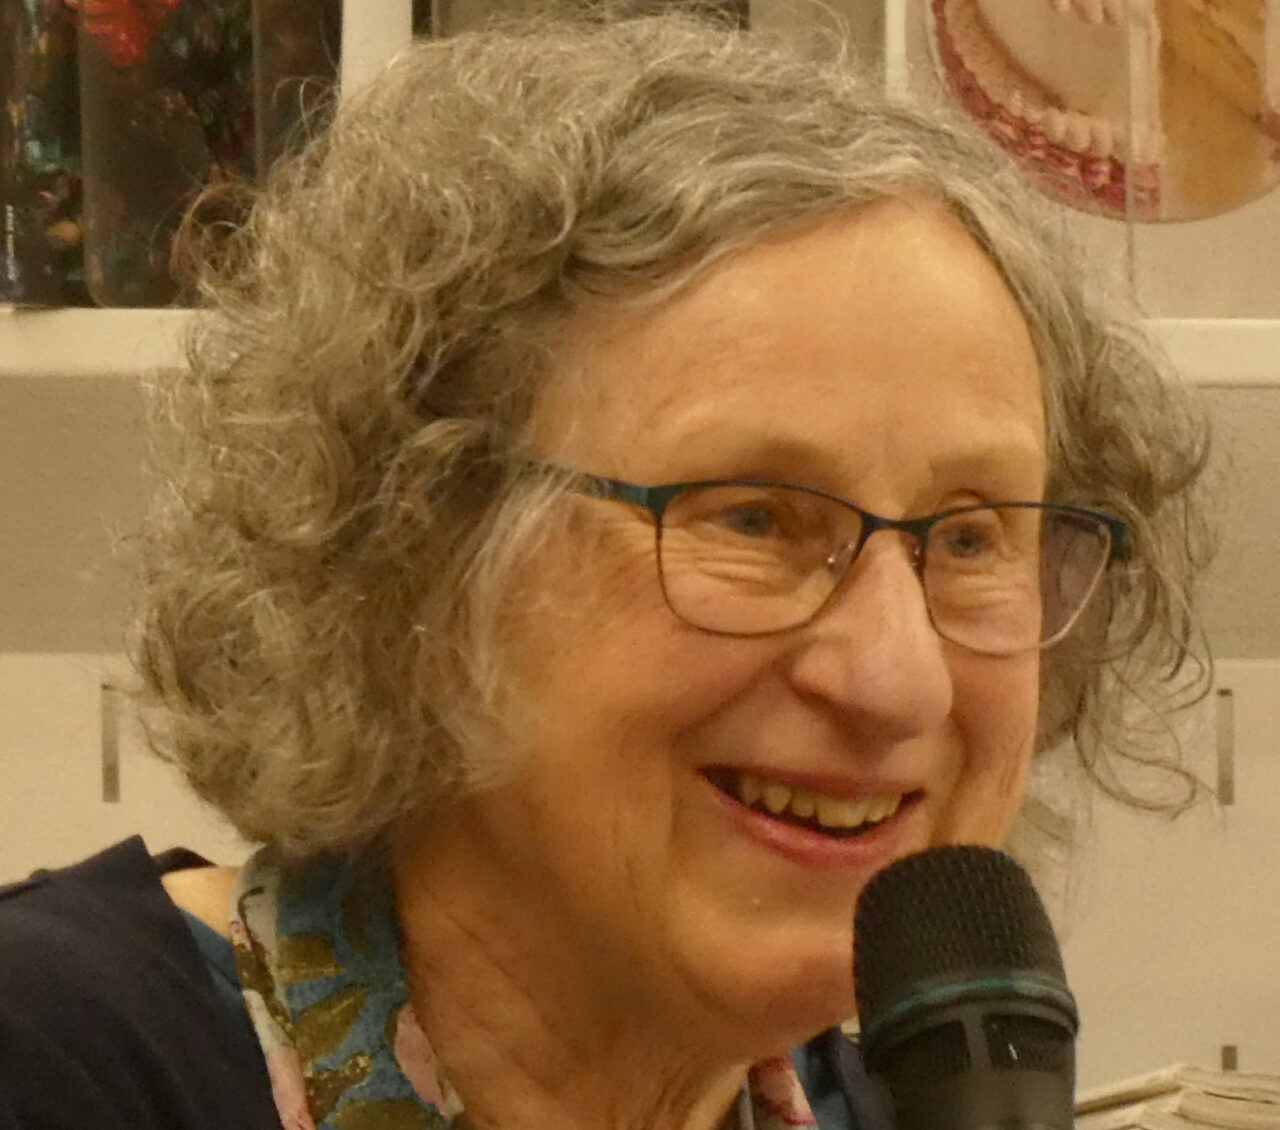 A grey-haired woman with glasses and a floral scarf leans forward an speaks into a handheld microphone